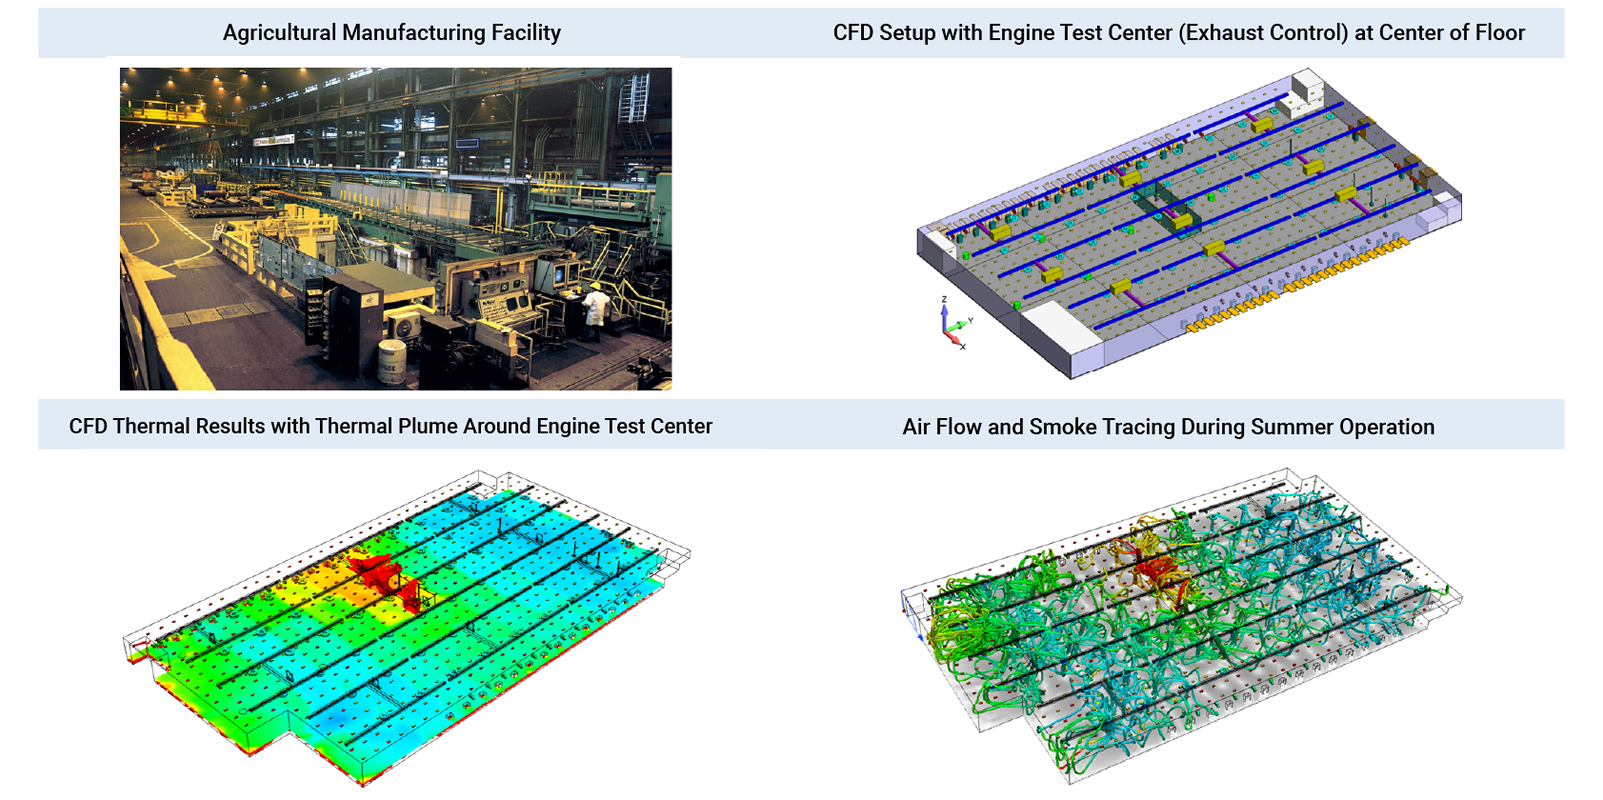 HVAC Analysis of Large Manufacturing Facility with Engine Test Center (Smoke Control) - Predictive Engineering